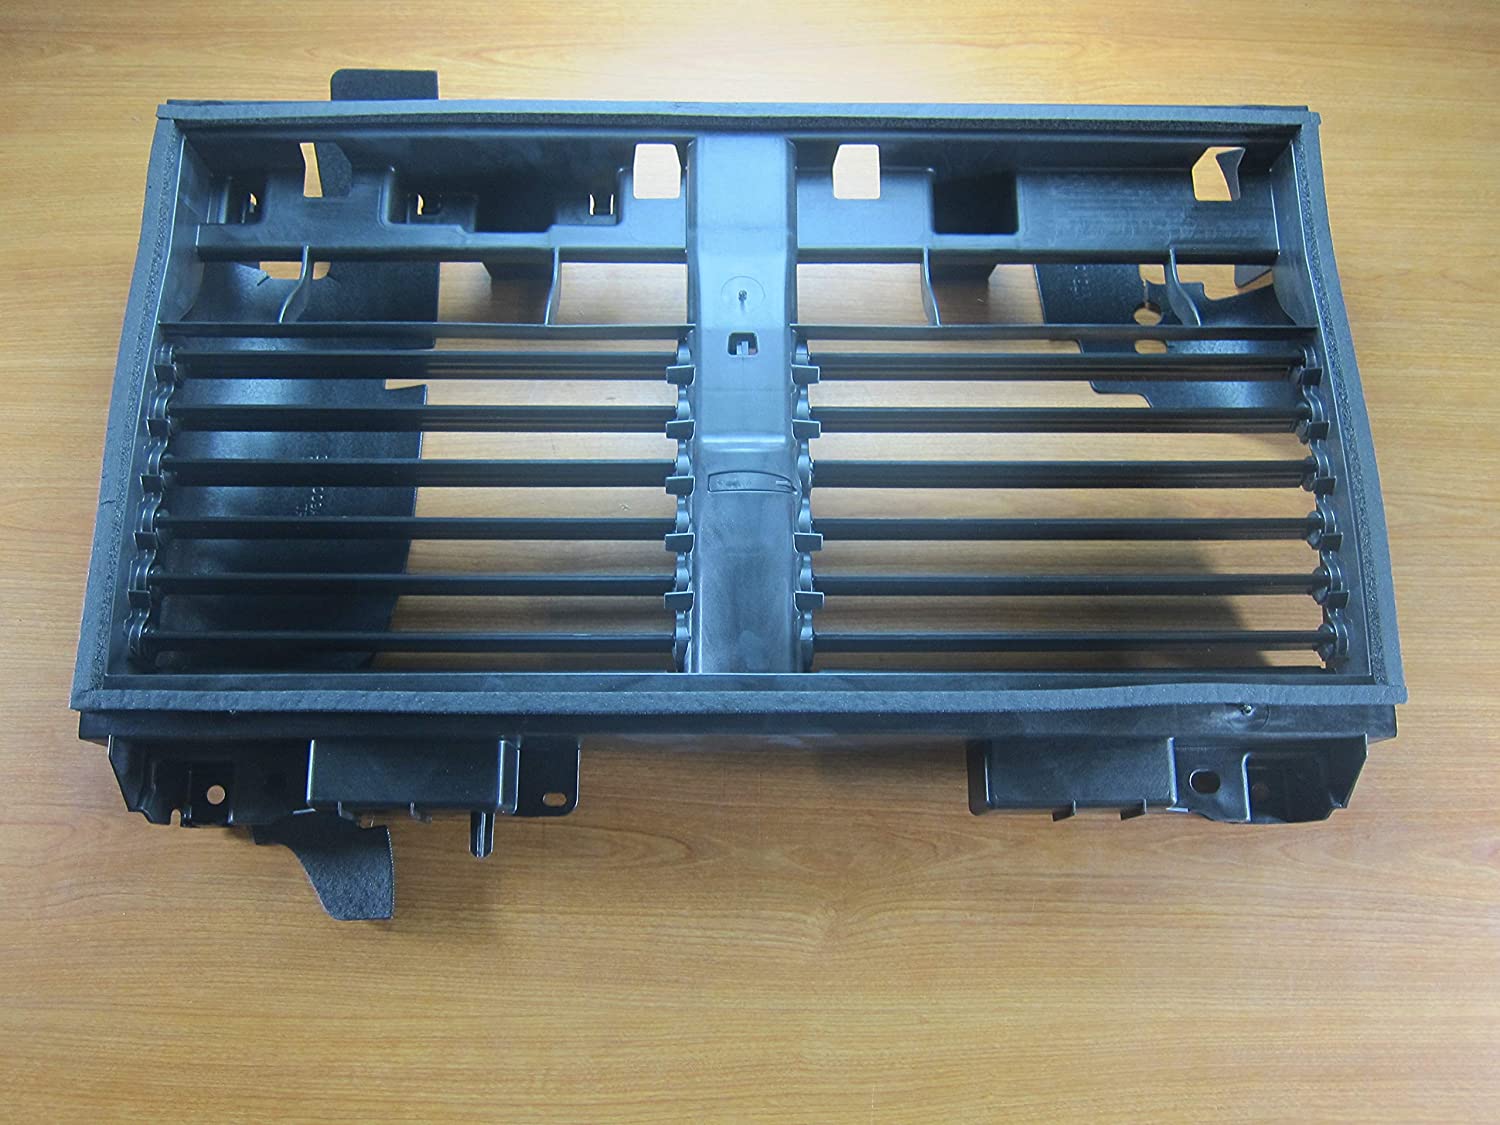 Active Grille Shutter